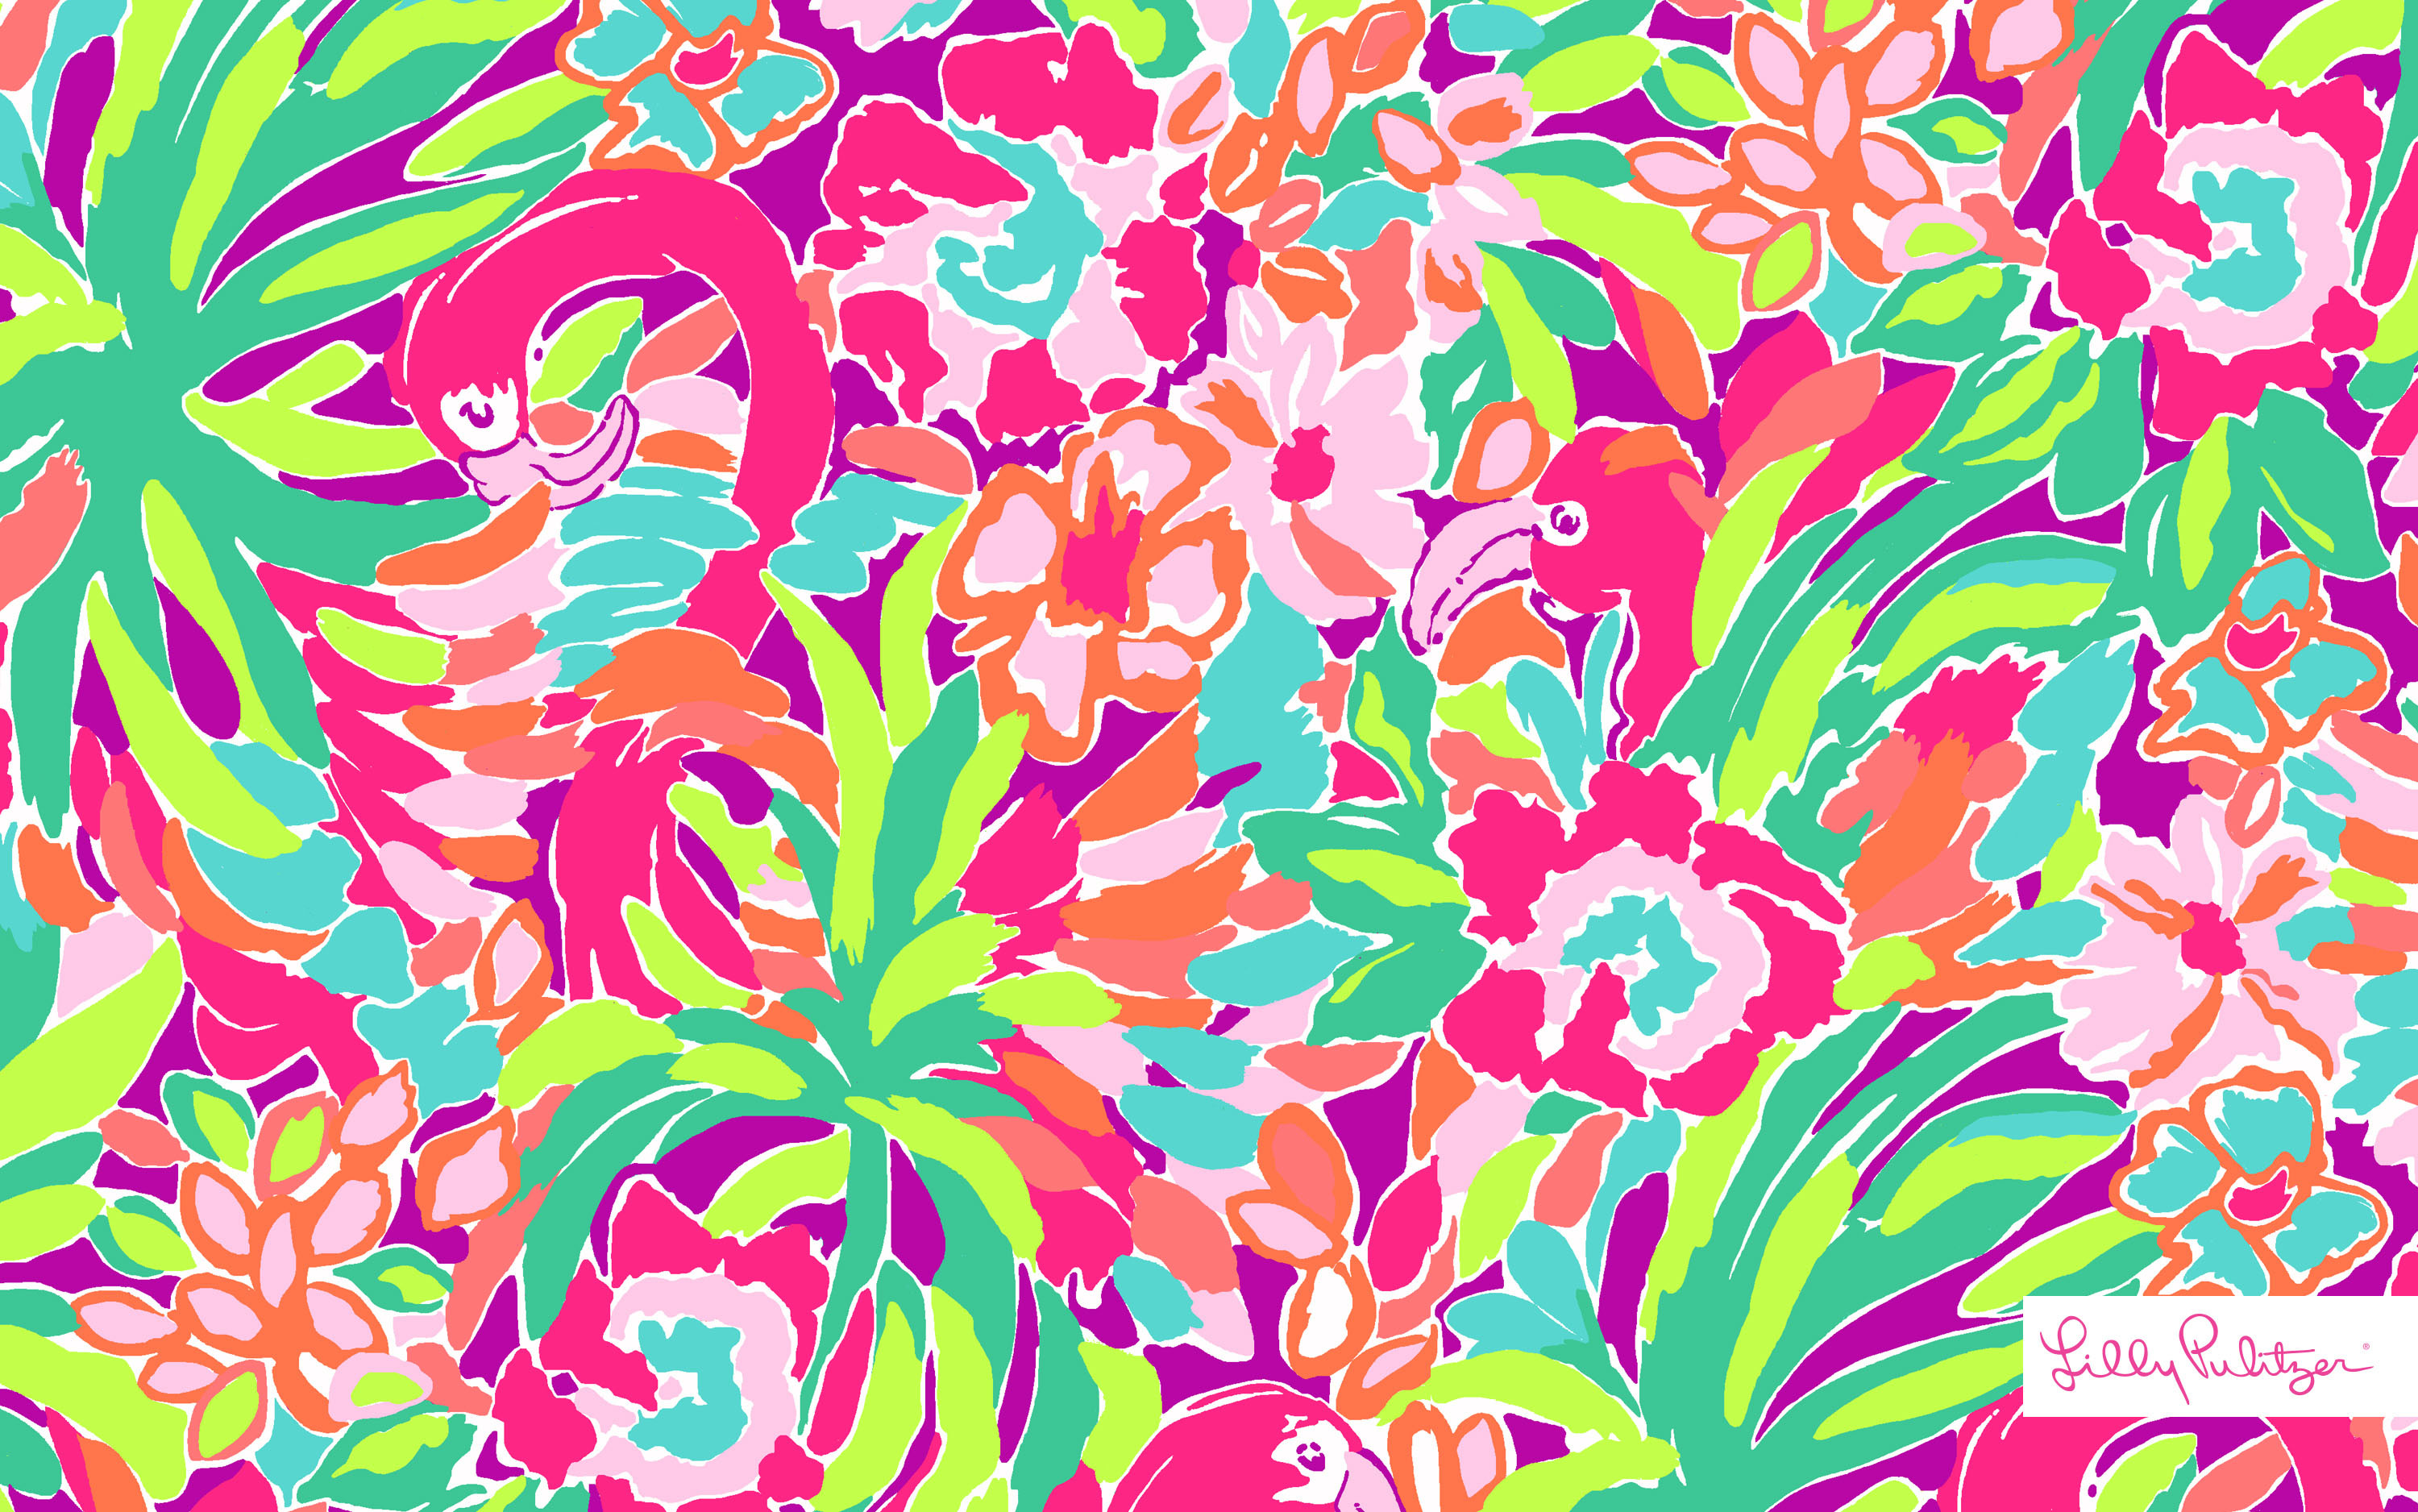 3000x1876 Images About Wallpaper On Pinterest Desktop Wallpapers Free And Lilly  Pulitzer. closet photos. johnson ...